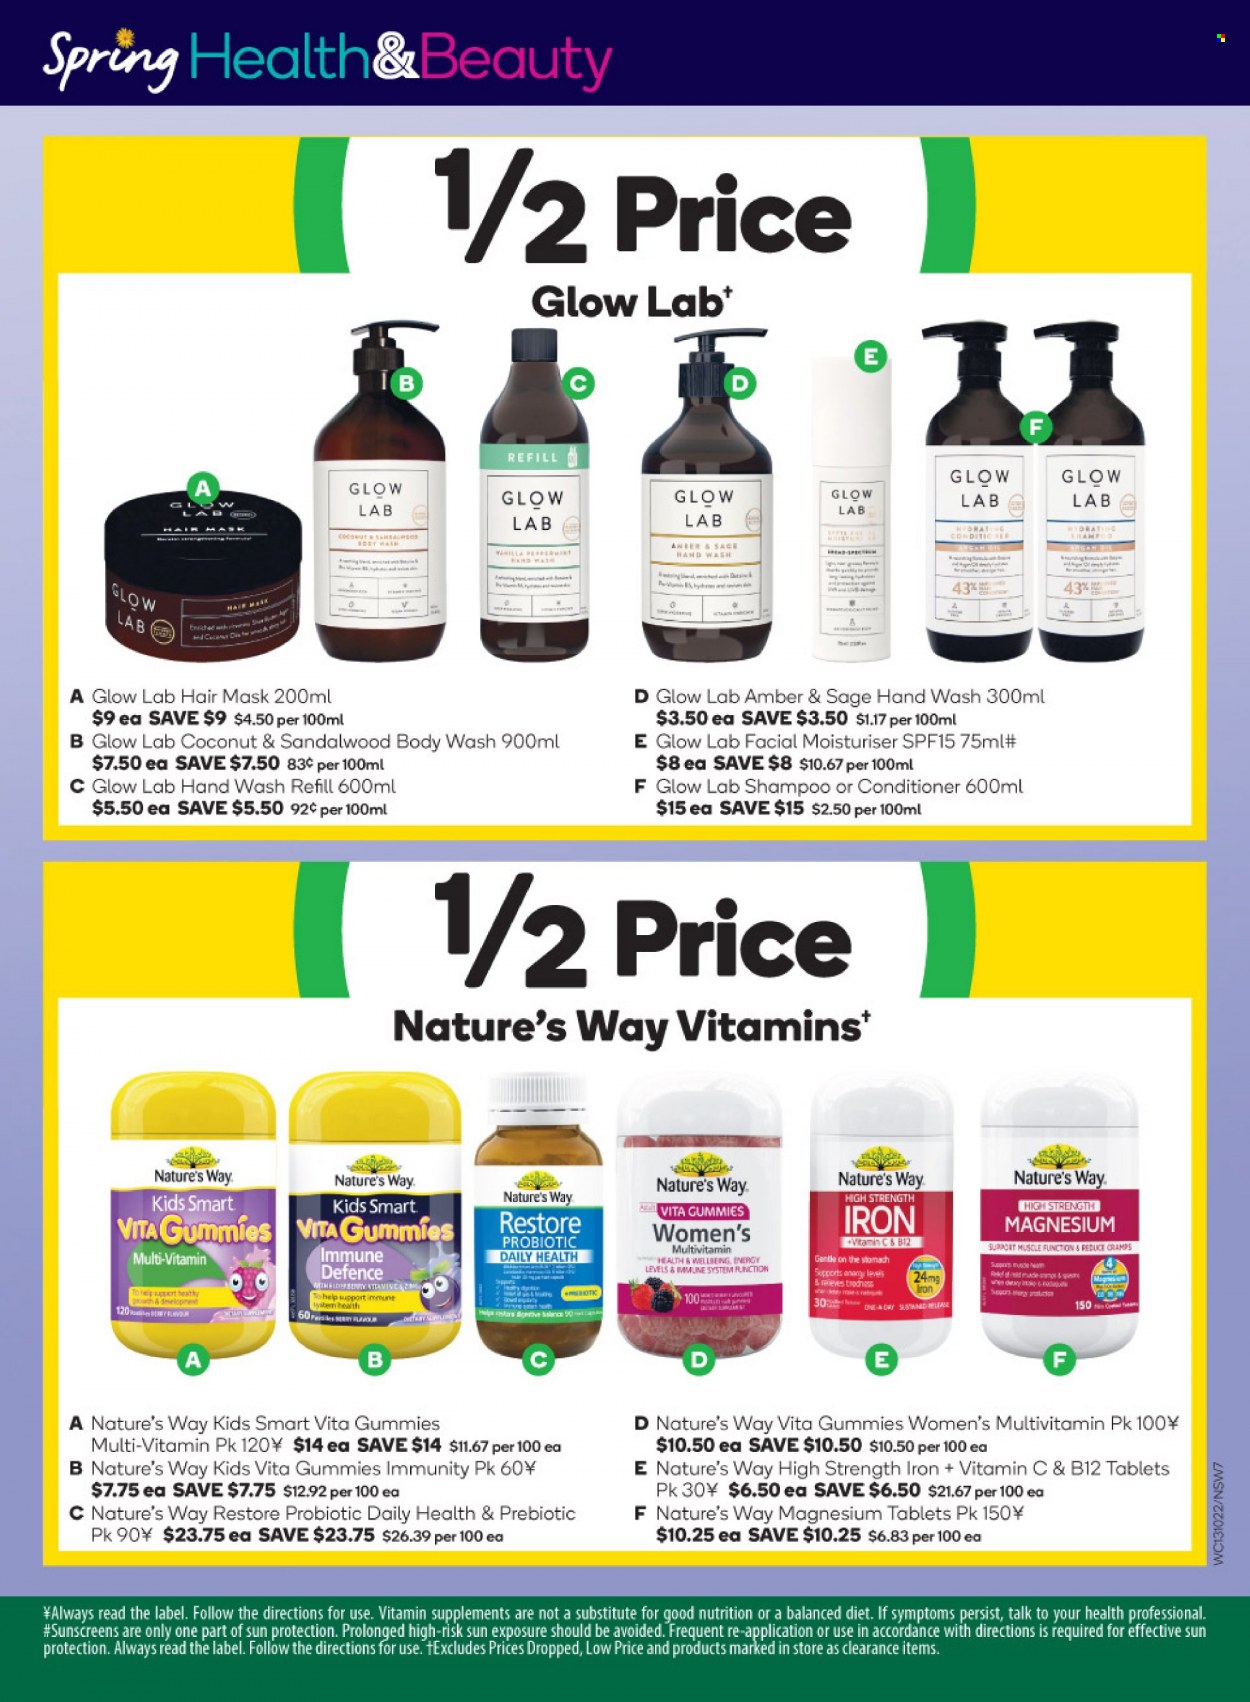 thumbnail - Woolworths Catalogue - 13 Oct 2021 - 19 Oct 2021 - Sales products - Ace, body wash, shampoo, hand wash, conditioner, hair mask, iron, magnesium, multivitamin, vitamin c. Page 7.